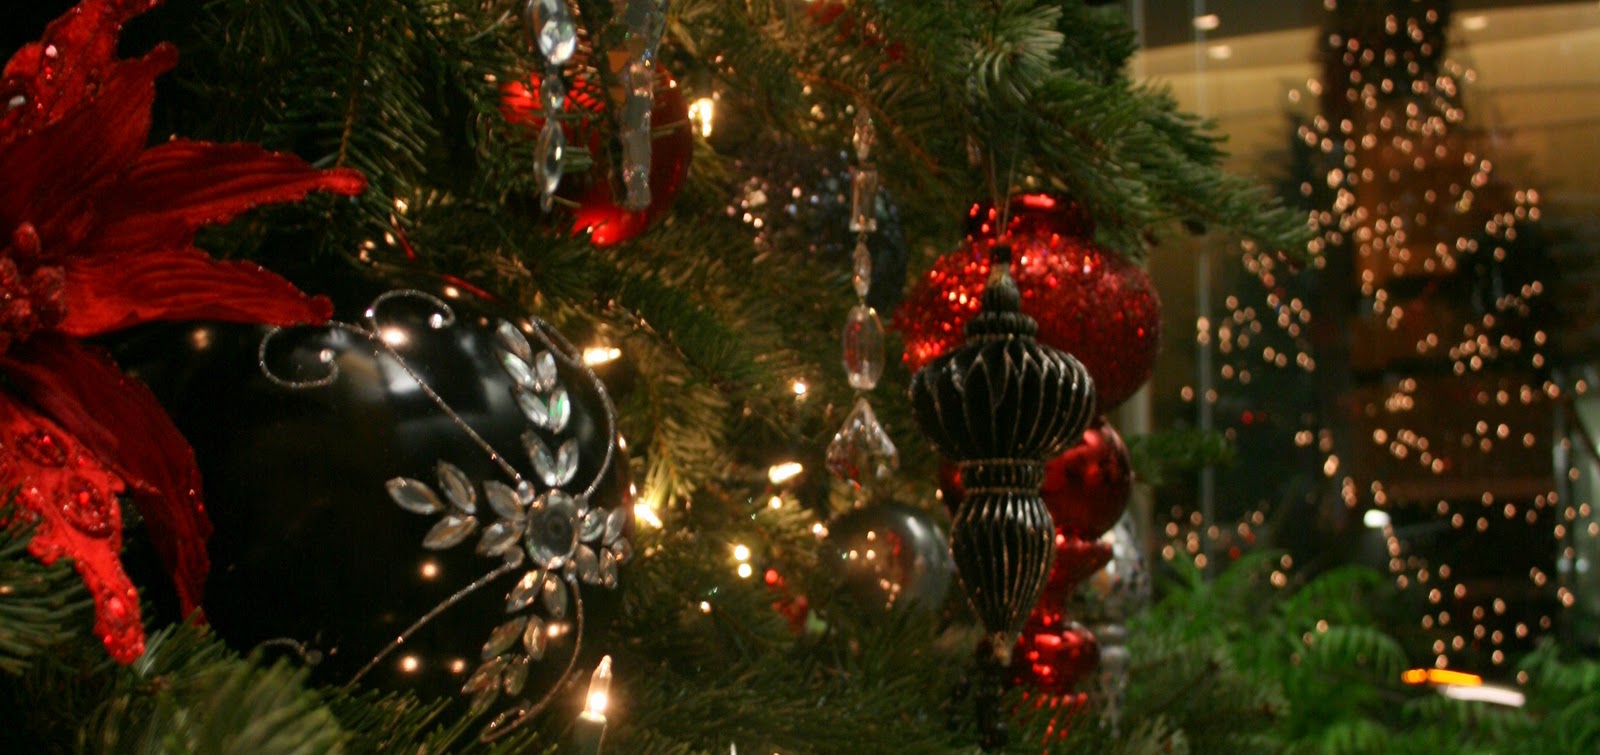 CHS Creative Productions: Red, Black & Silver Holiday Decorations~